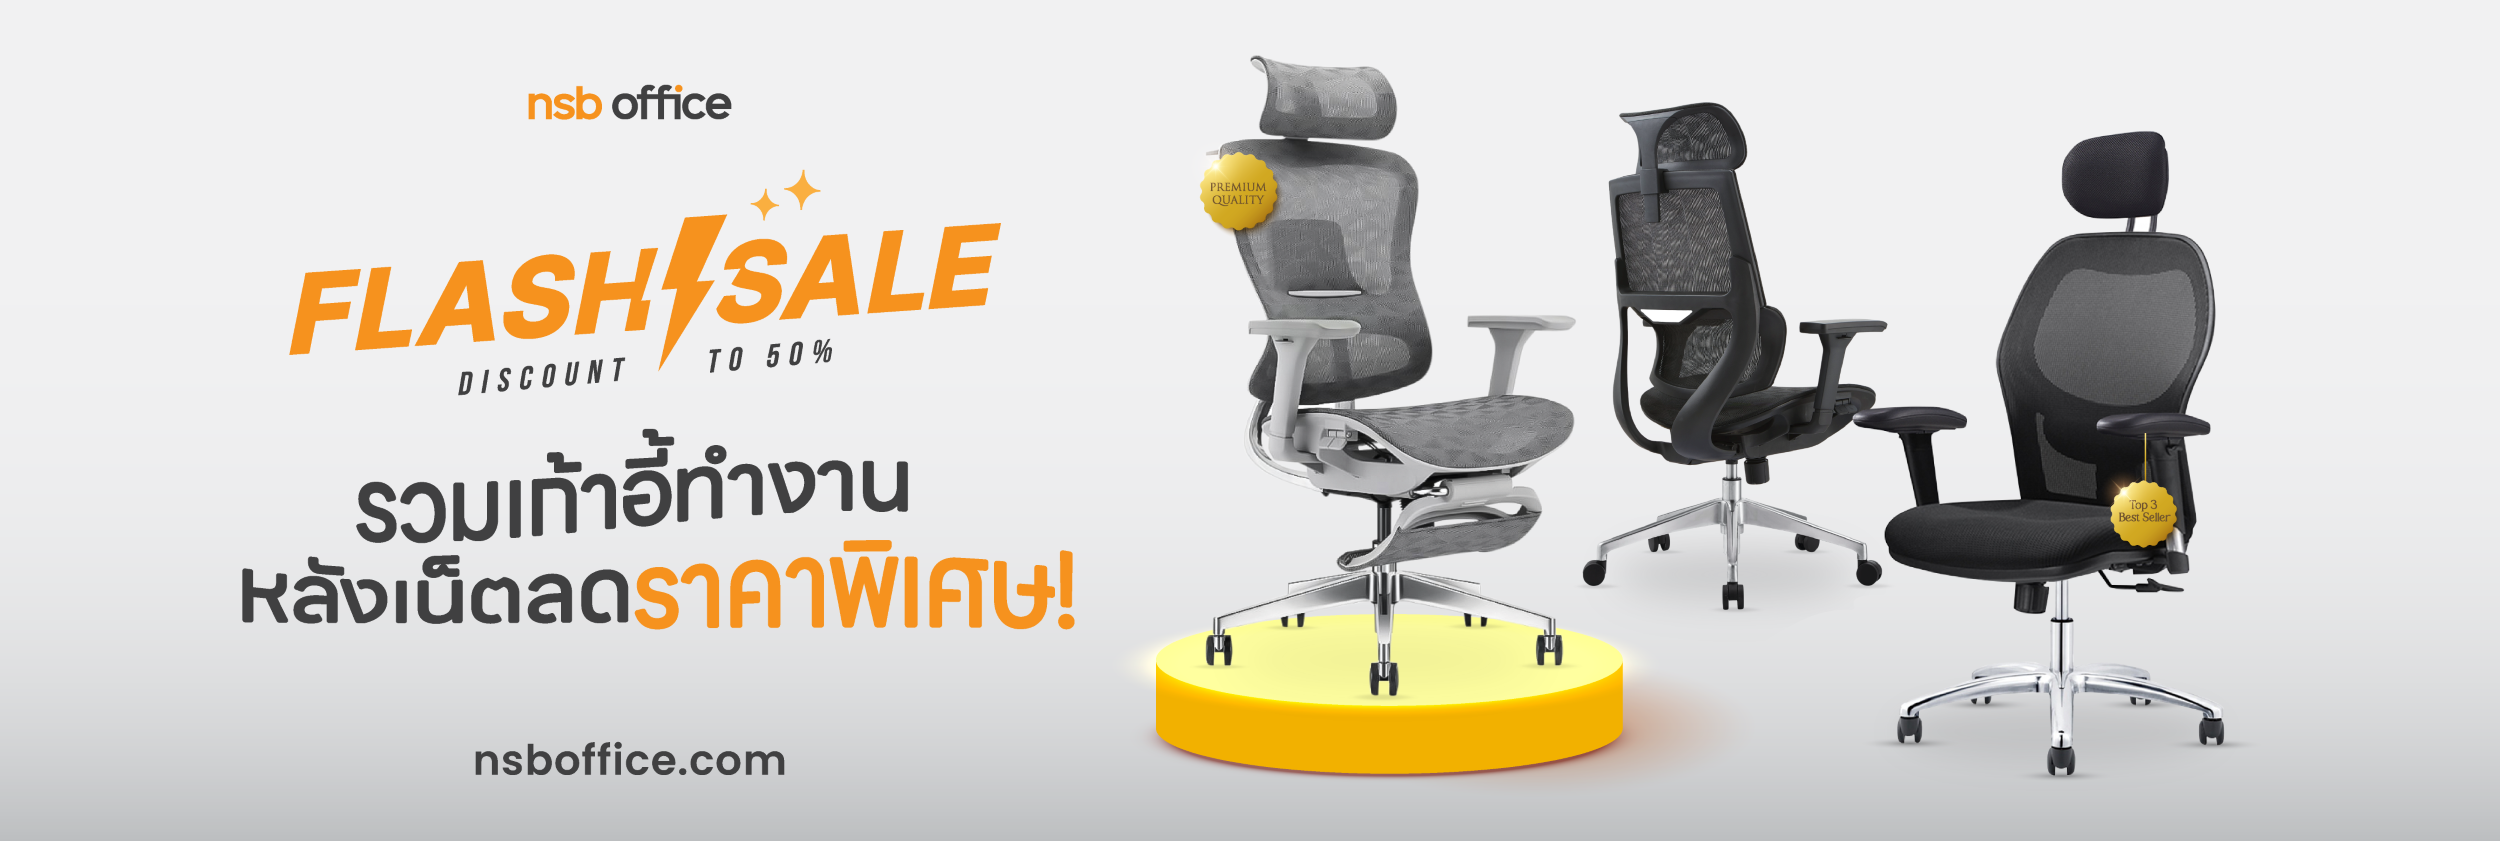 PROMOTION PAGE ALL OFFICE CHAIRS 